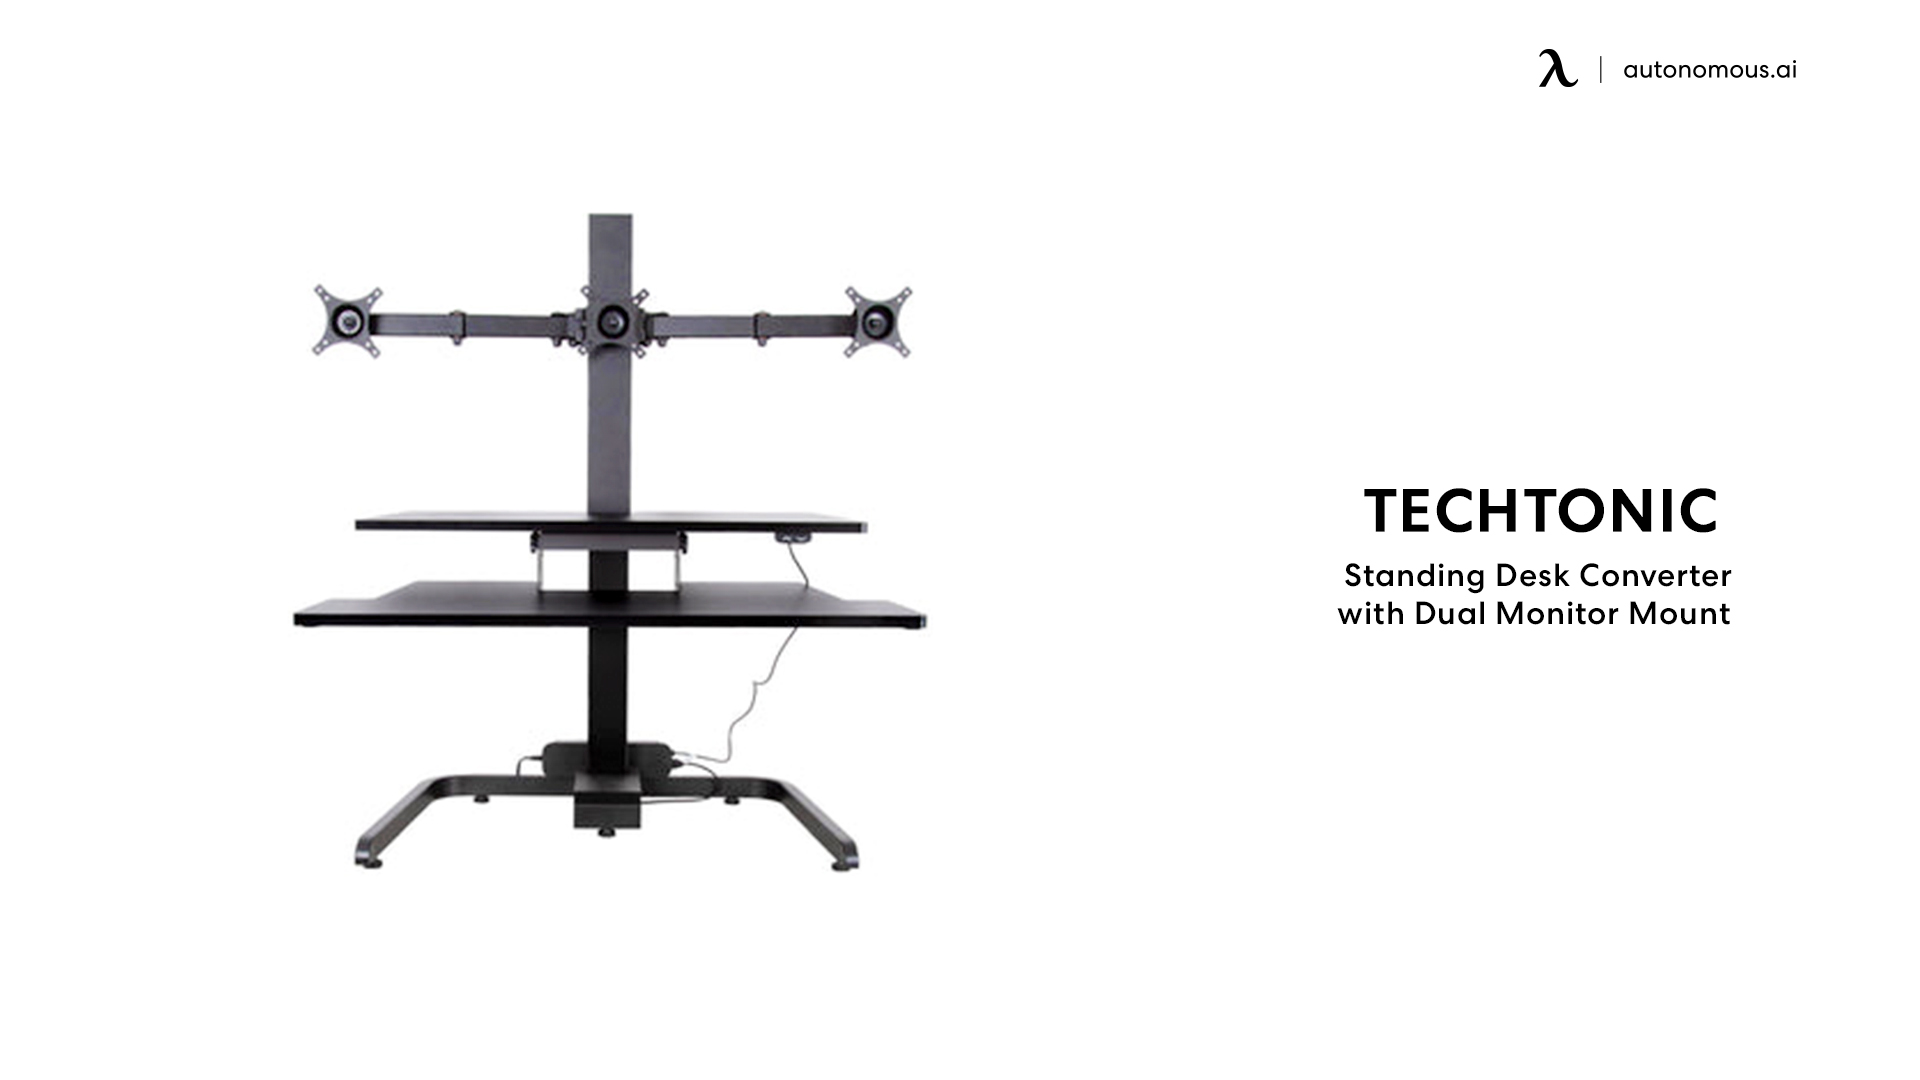 Techtonic Standing Desk Converter with Dual Monitor Mount